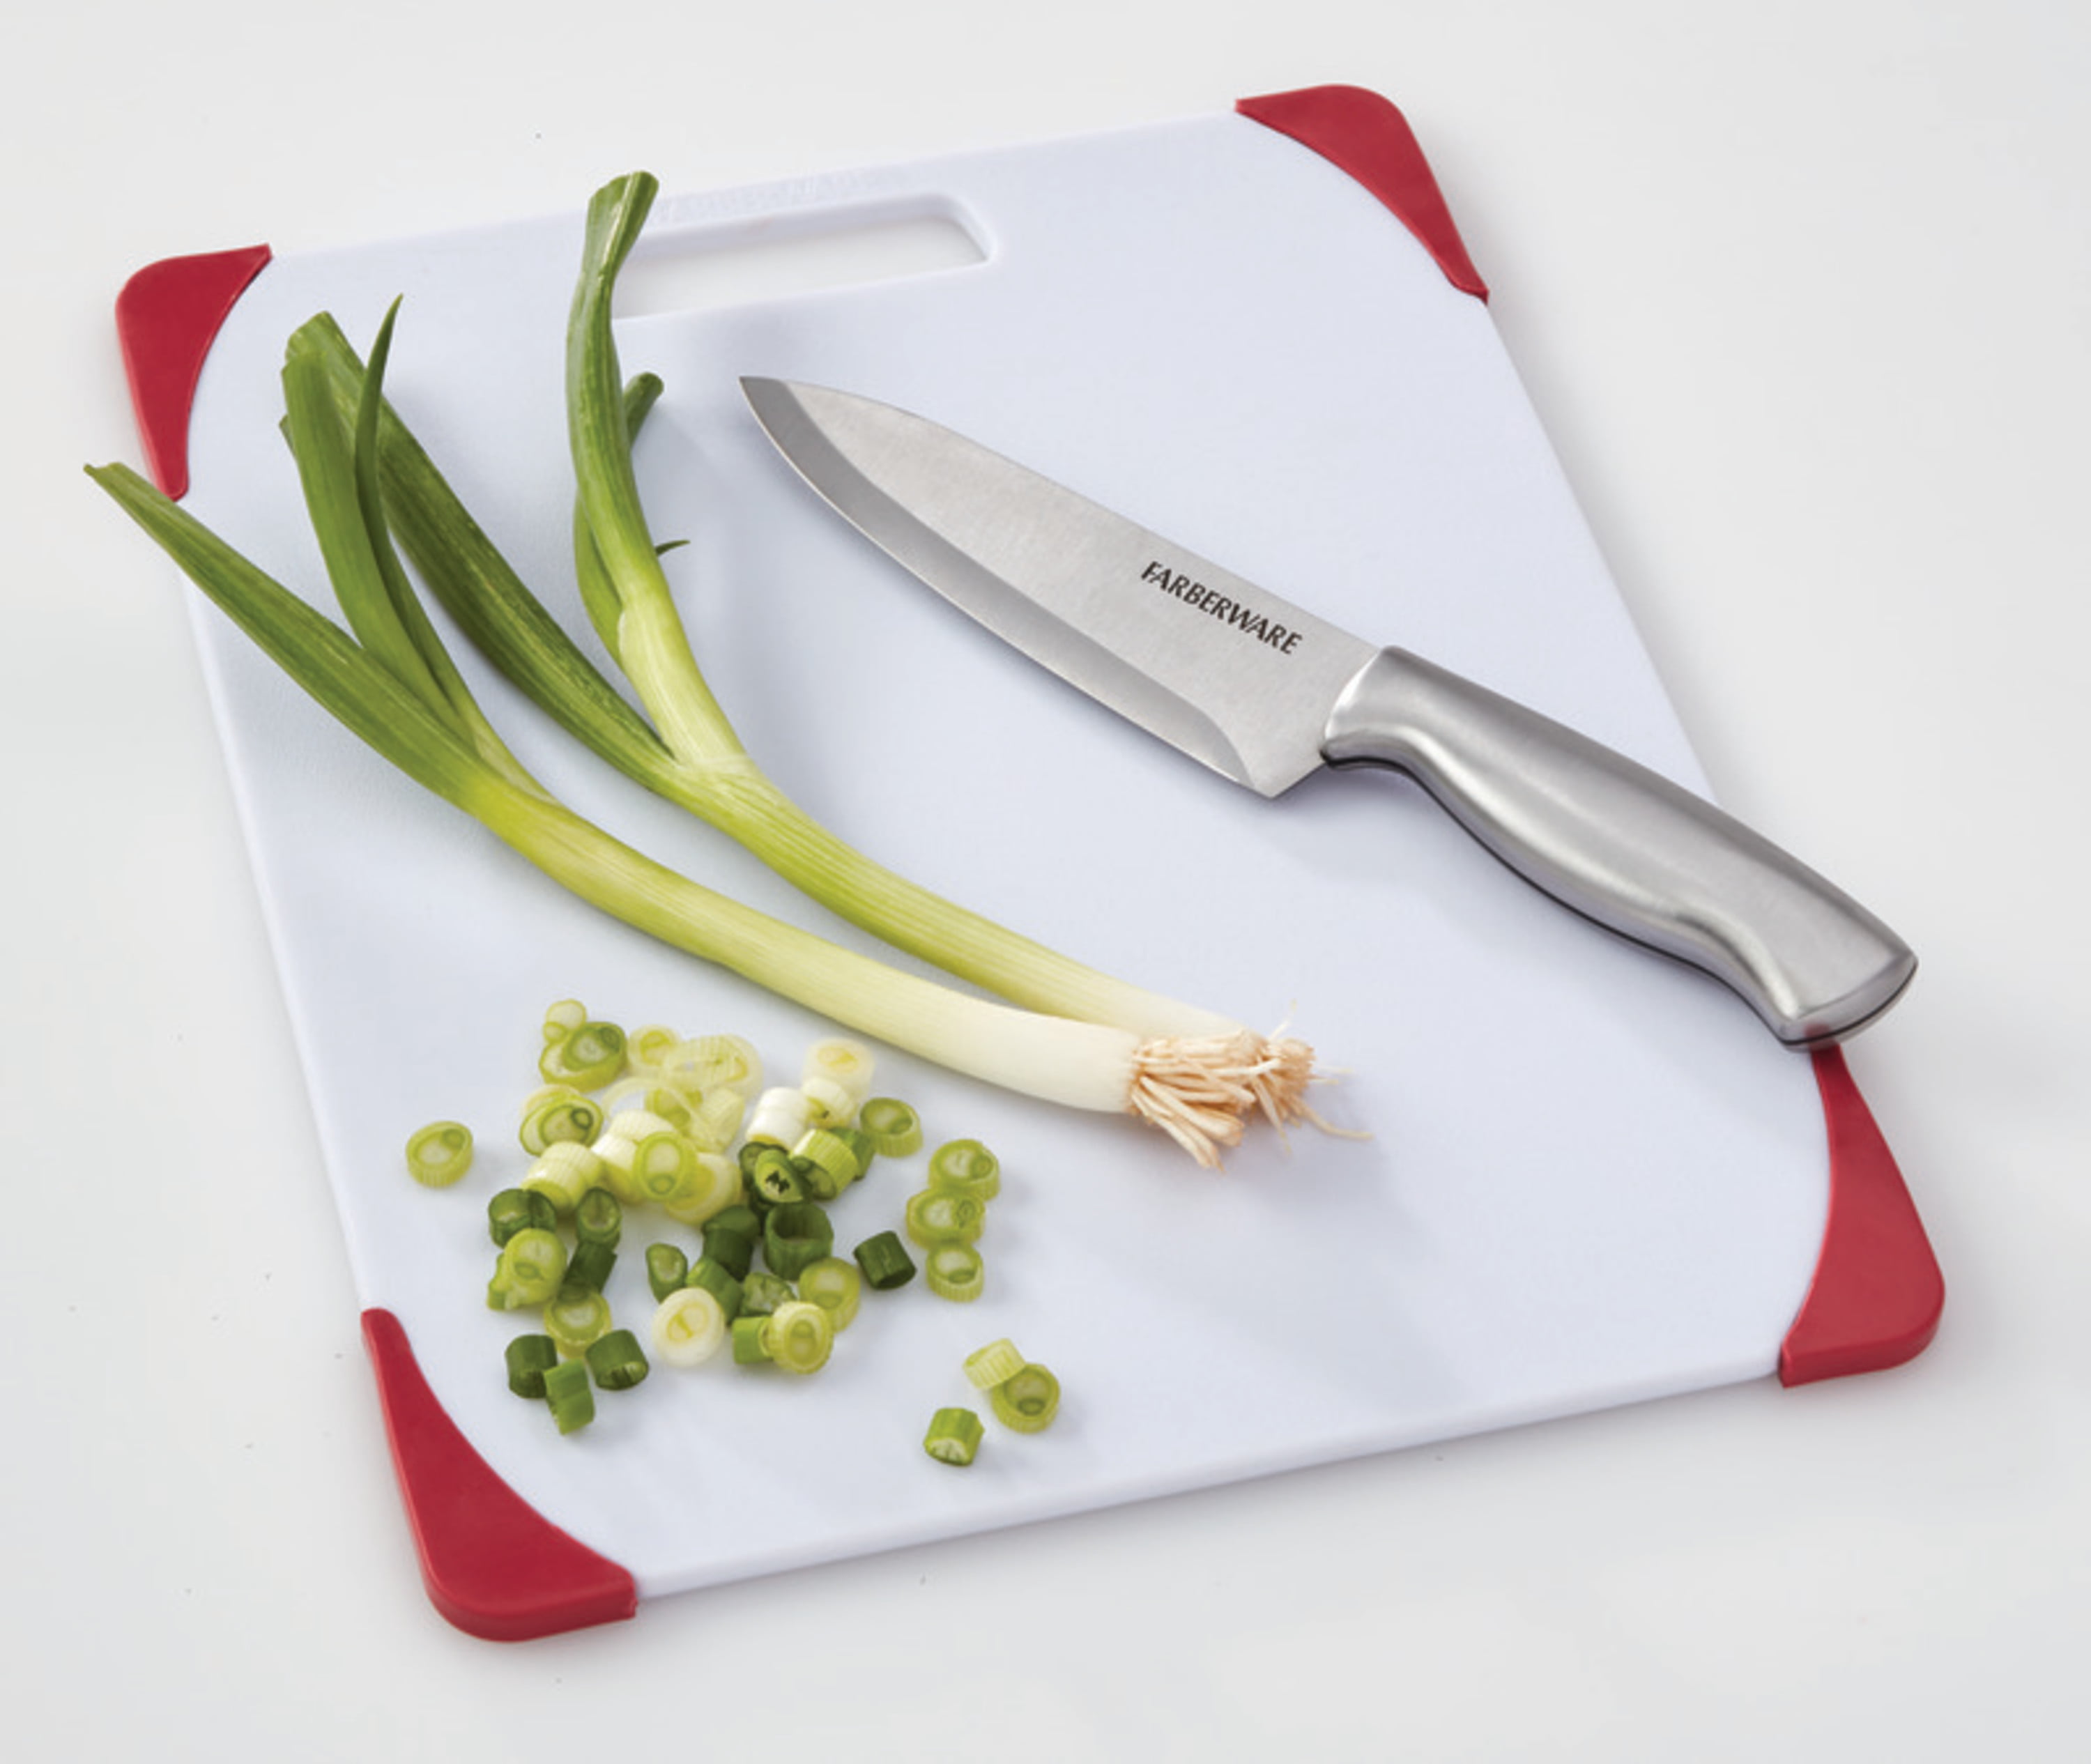 FARBERWARE Large Cutting Board With Juice Grooves 2 packs